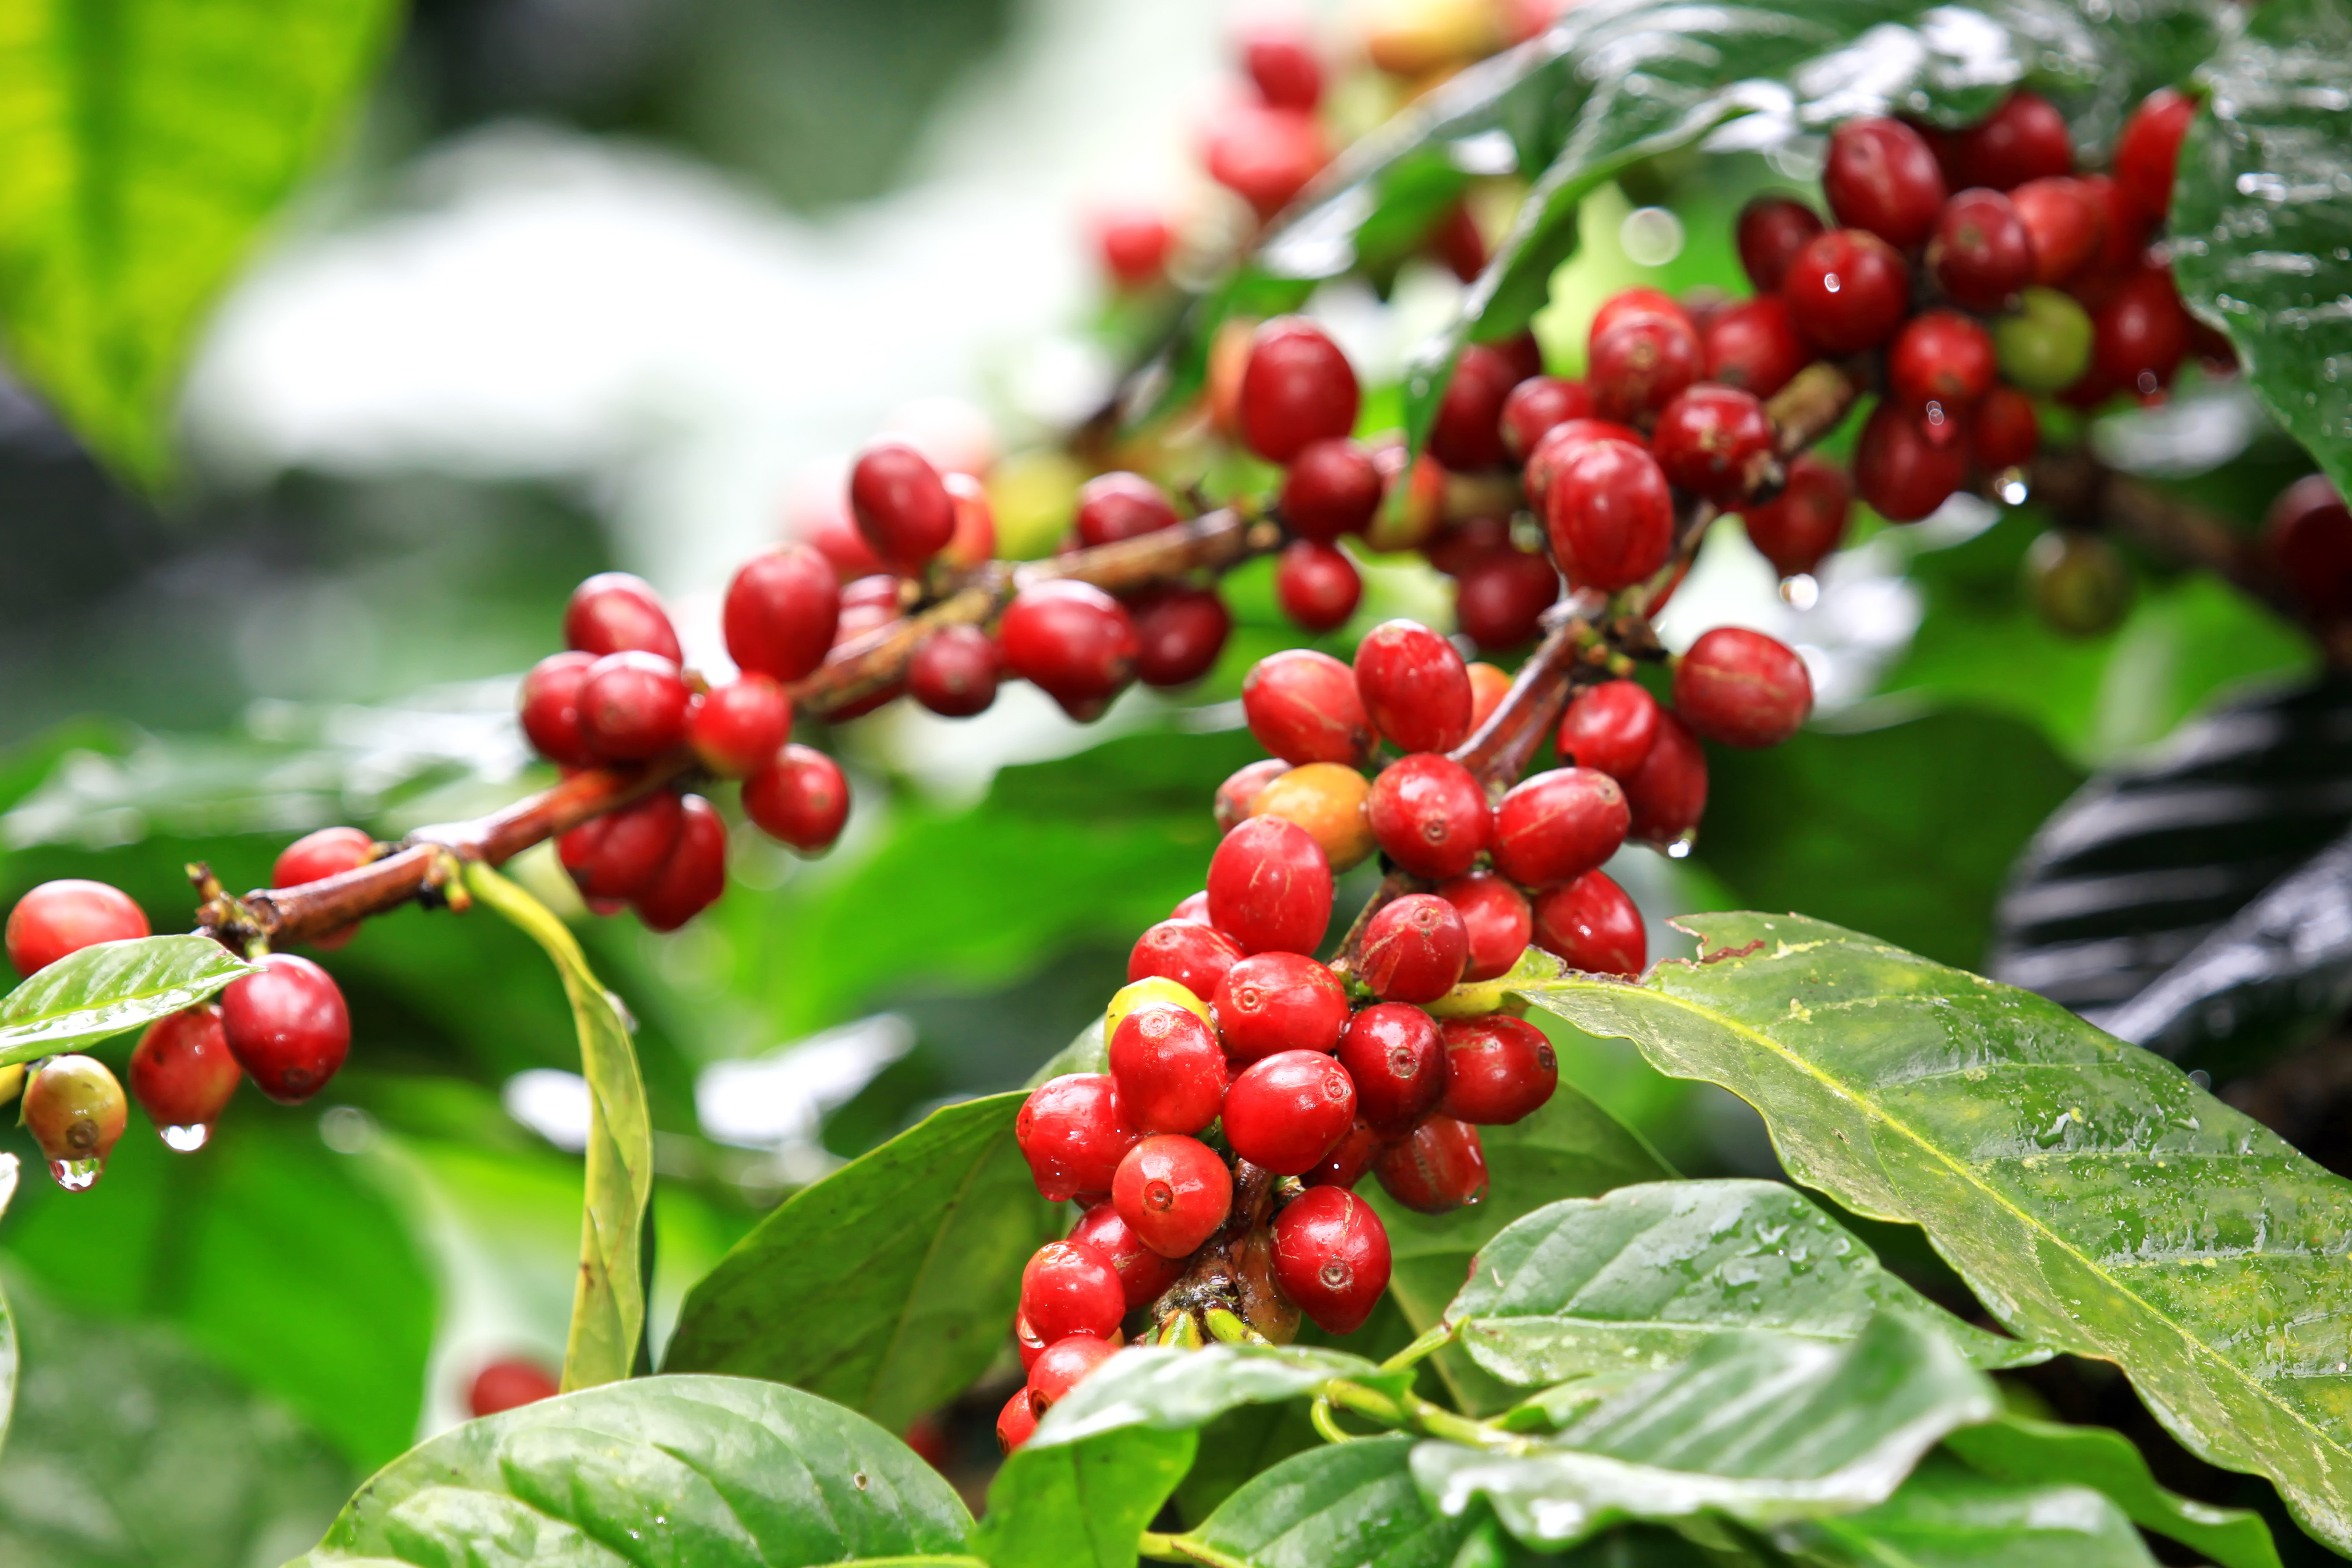 reveals the impact of Ebola on coffee supplies and prices